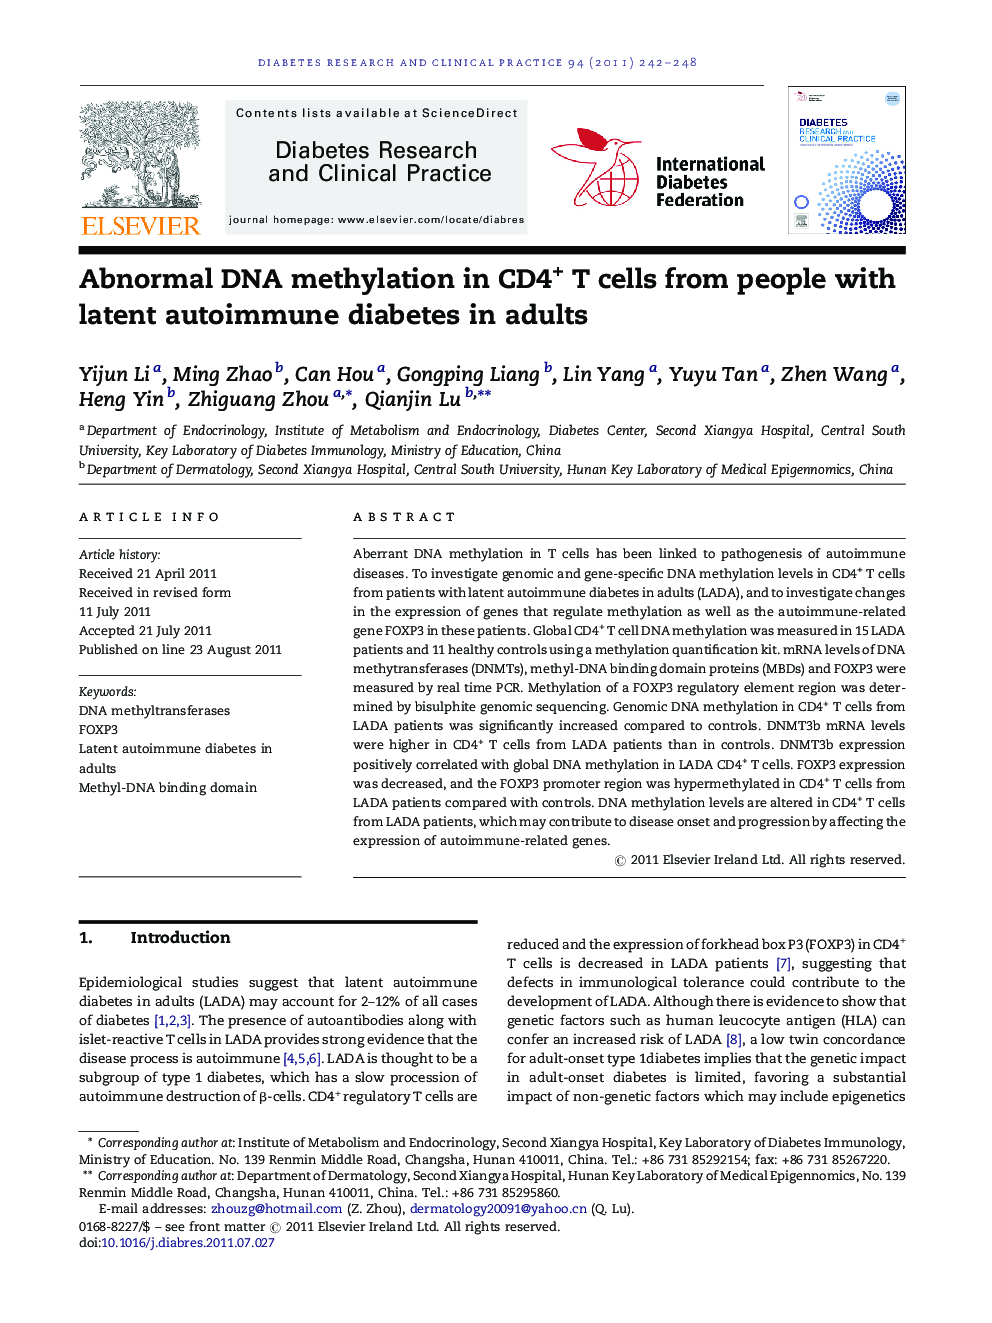 Abnormal DNA methylation in CD4+ T cells from people with latent autoimmune diabetes in adults